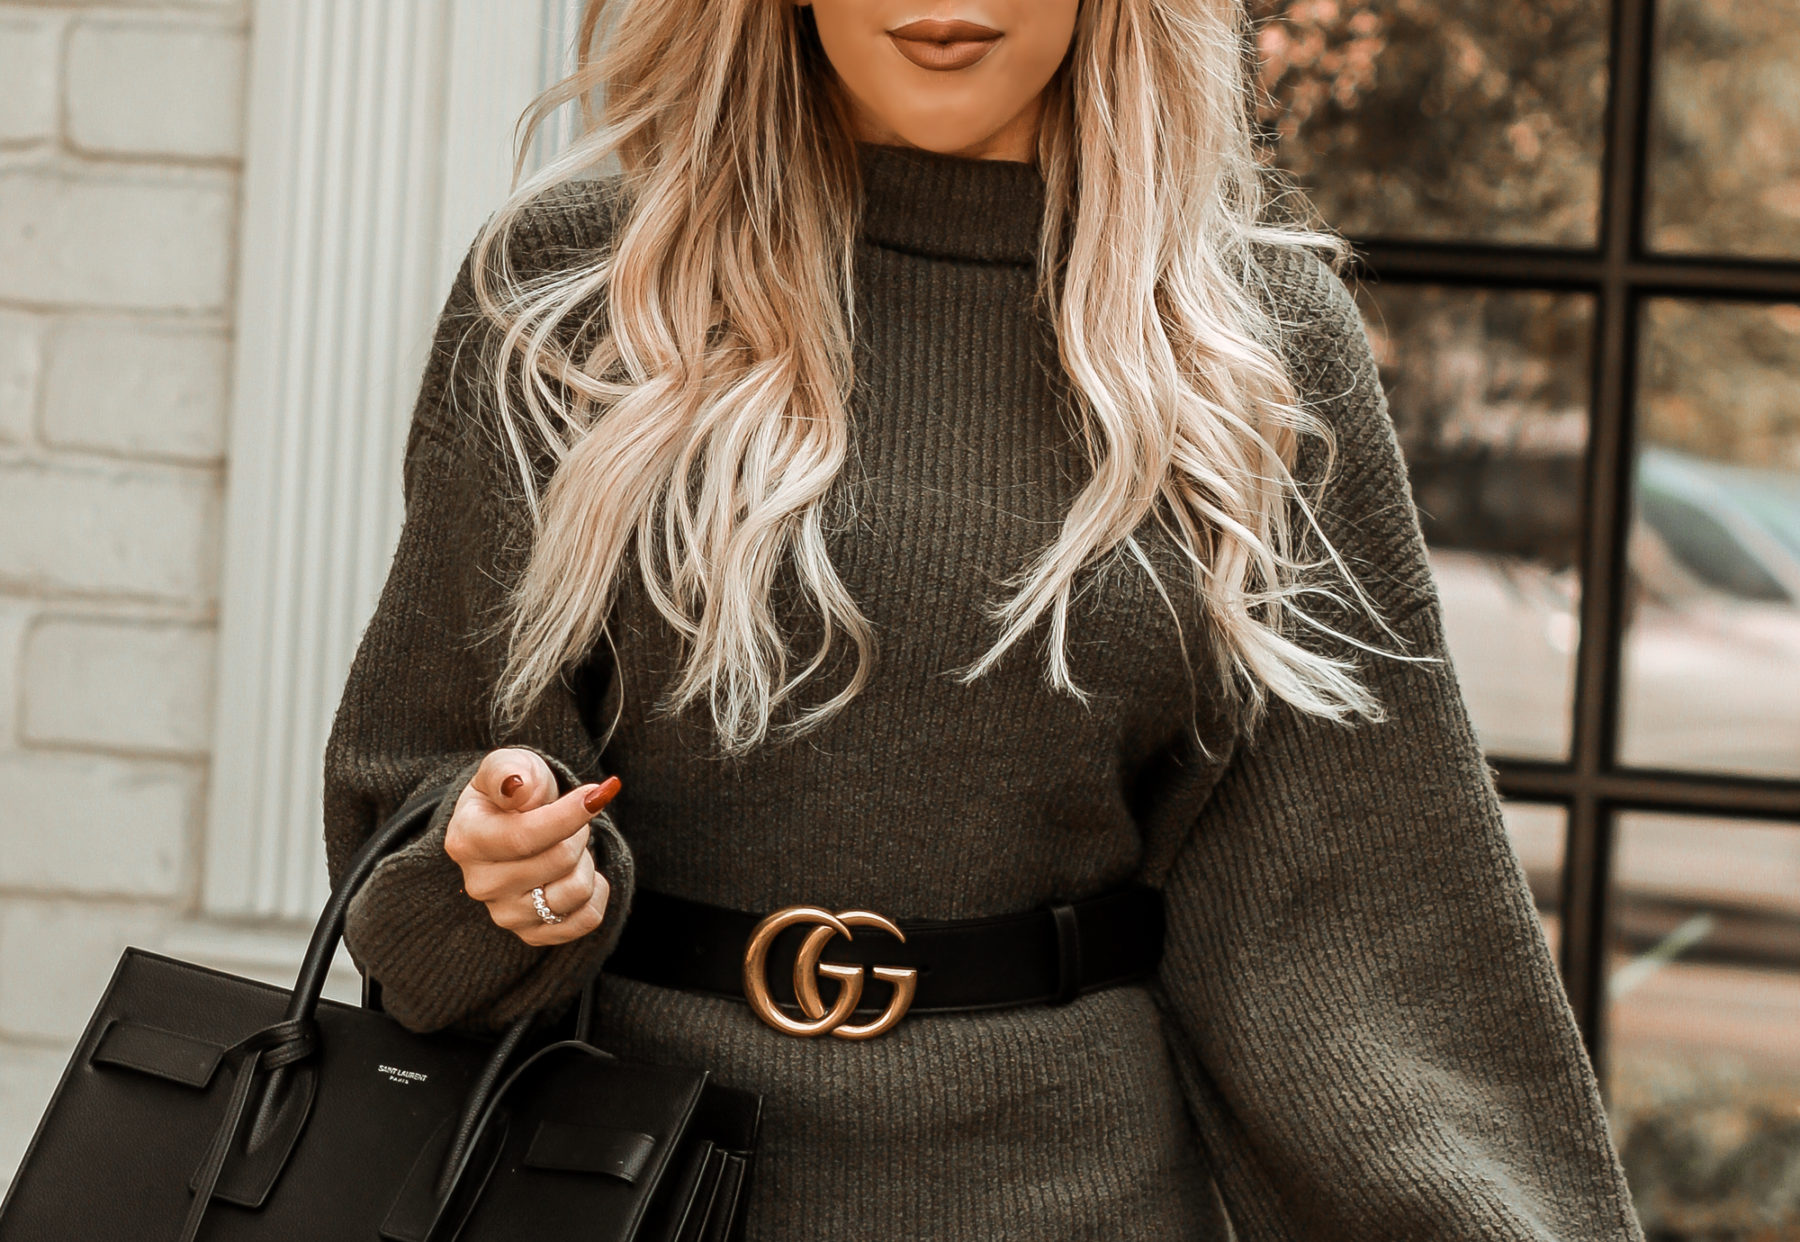 Gucci Belt Styling | Oversized Sweater | Fall Fashion | Holiday Style | Blondie in the City by Hayley Larue